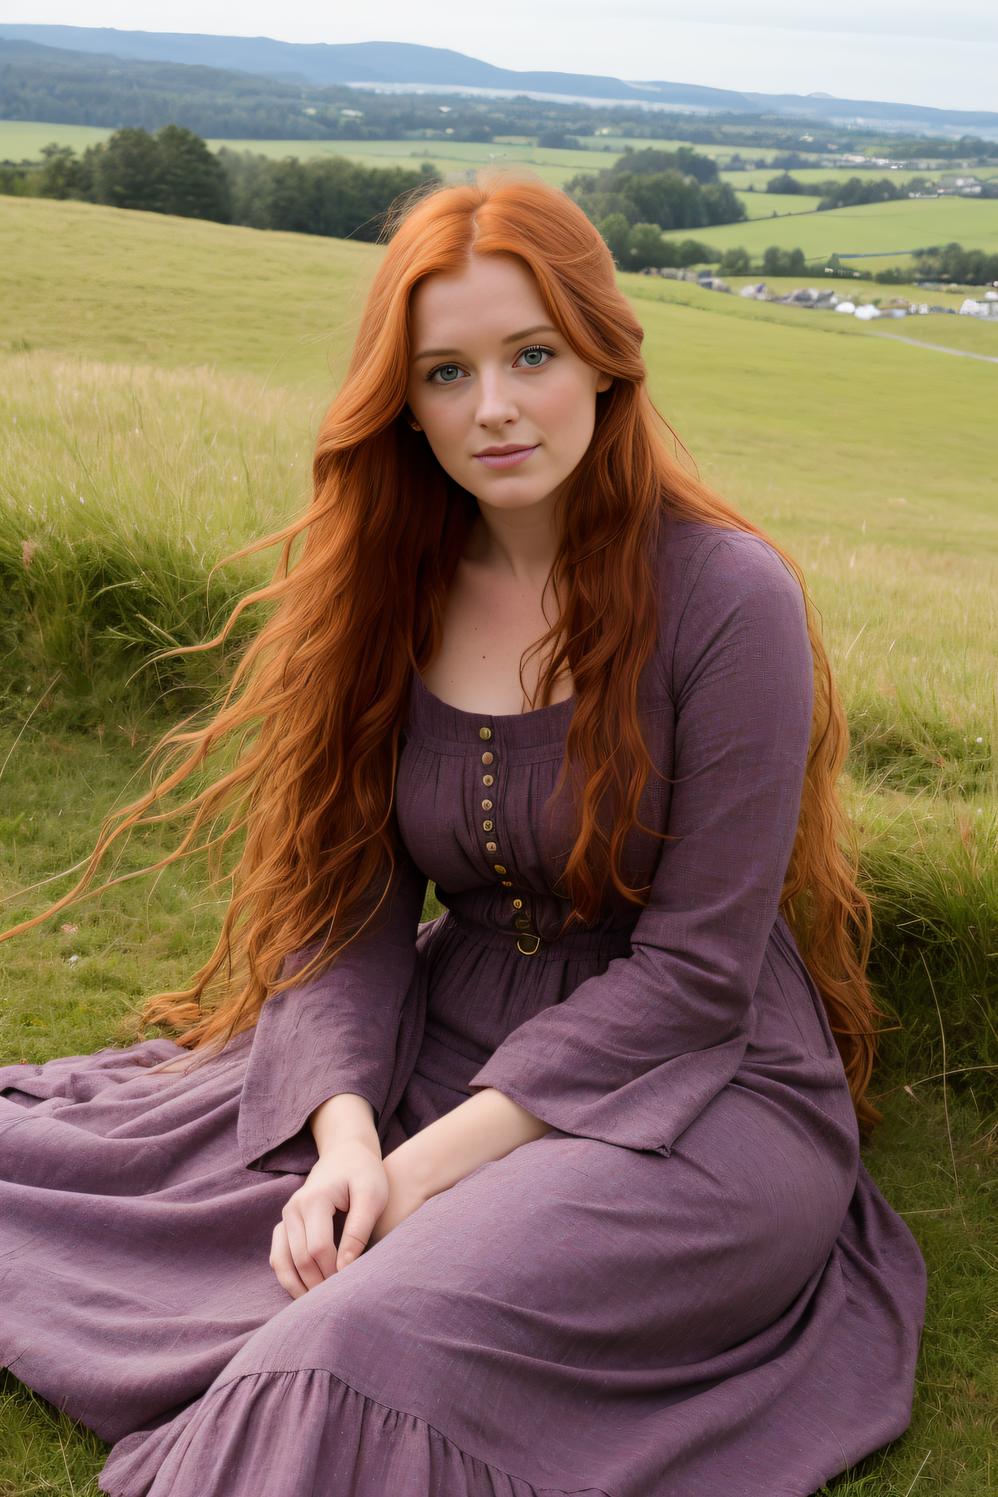 Lady with Long Red Hair Sitting in a Field